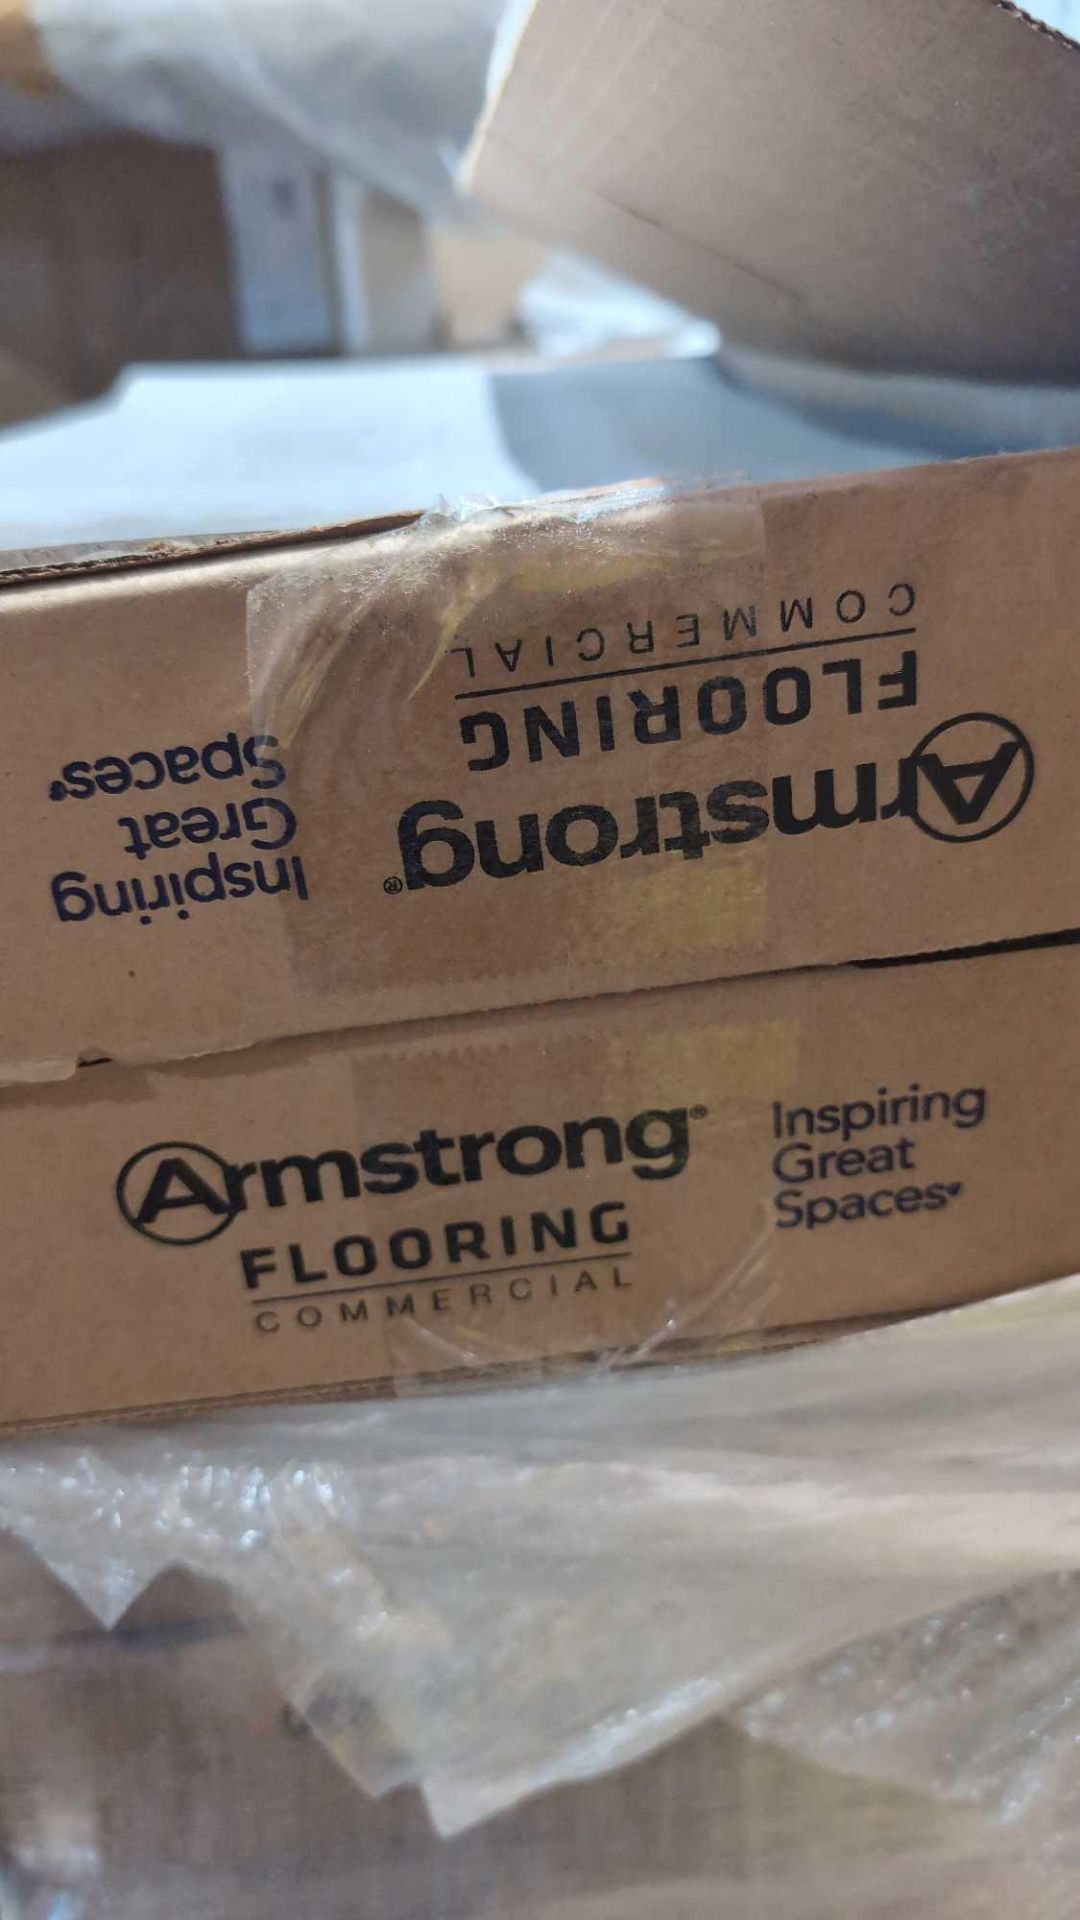 Boxes of Armstrong Commercial Flooring - Image 4 of 8